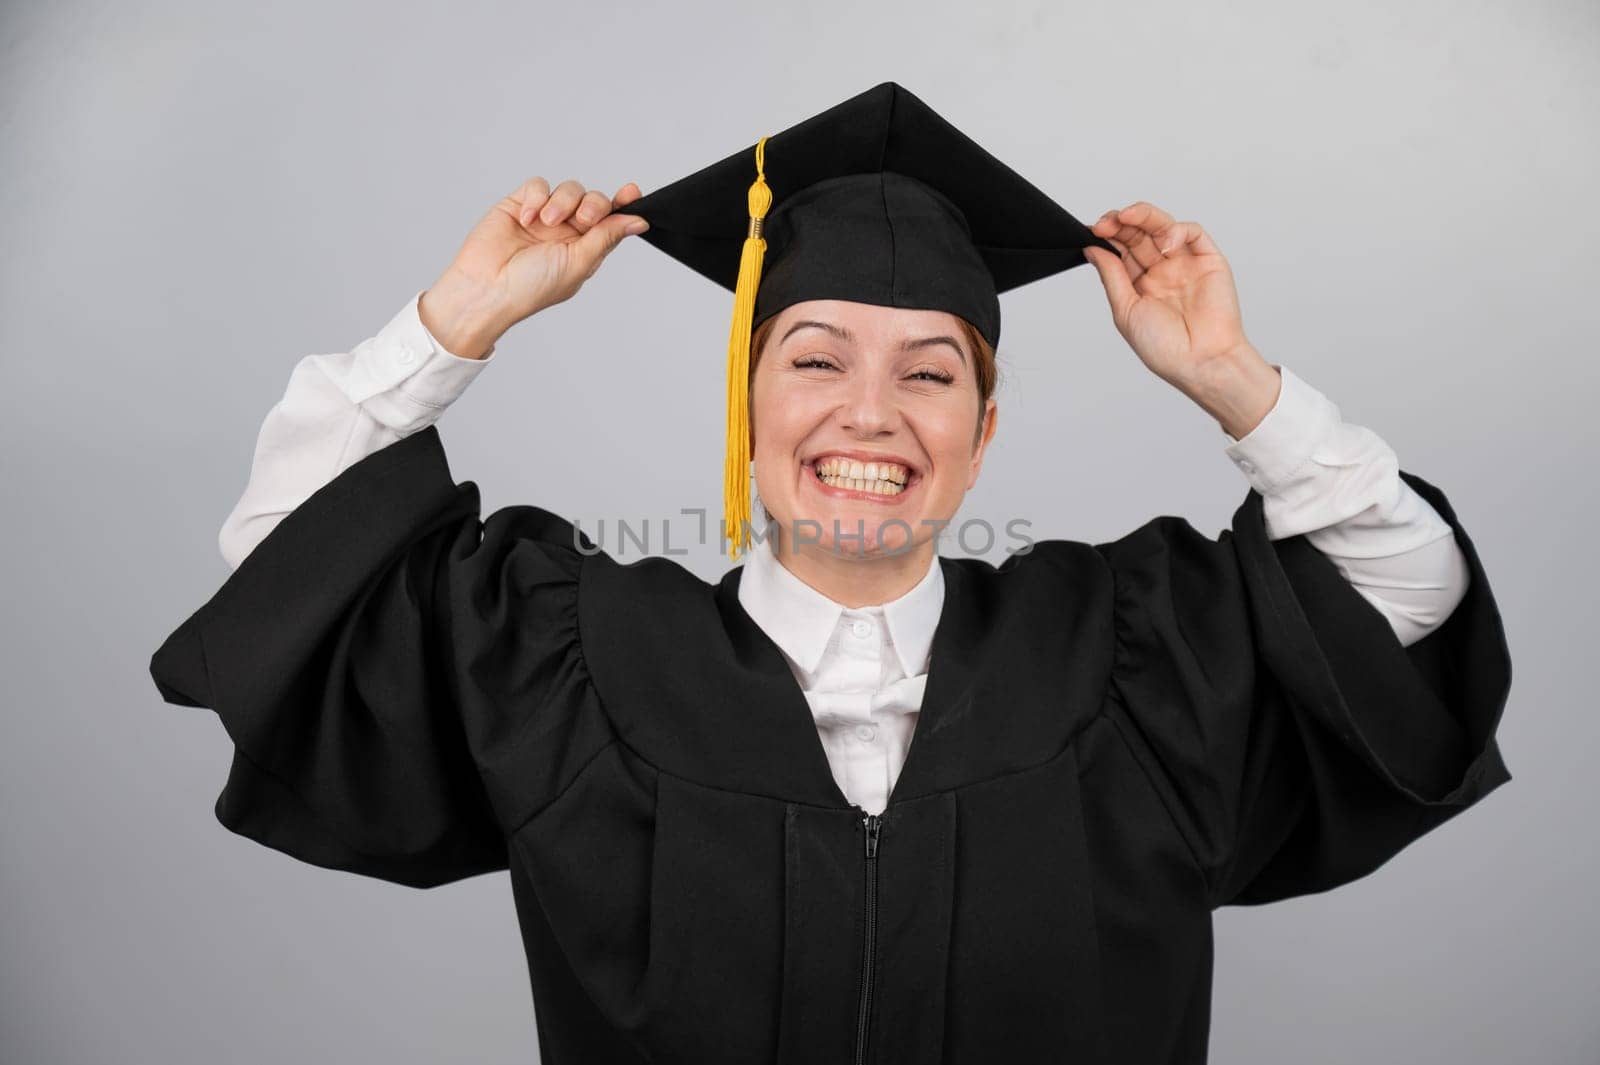 Smiling woman in graduation gown holding cap by tassel on white background